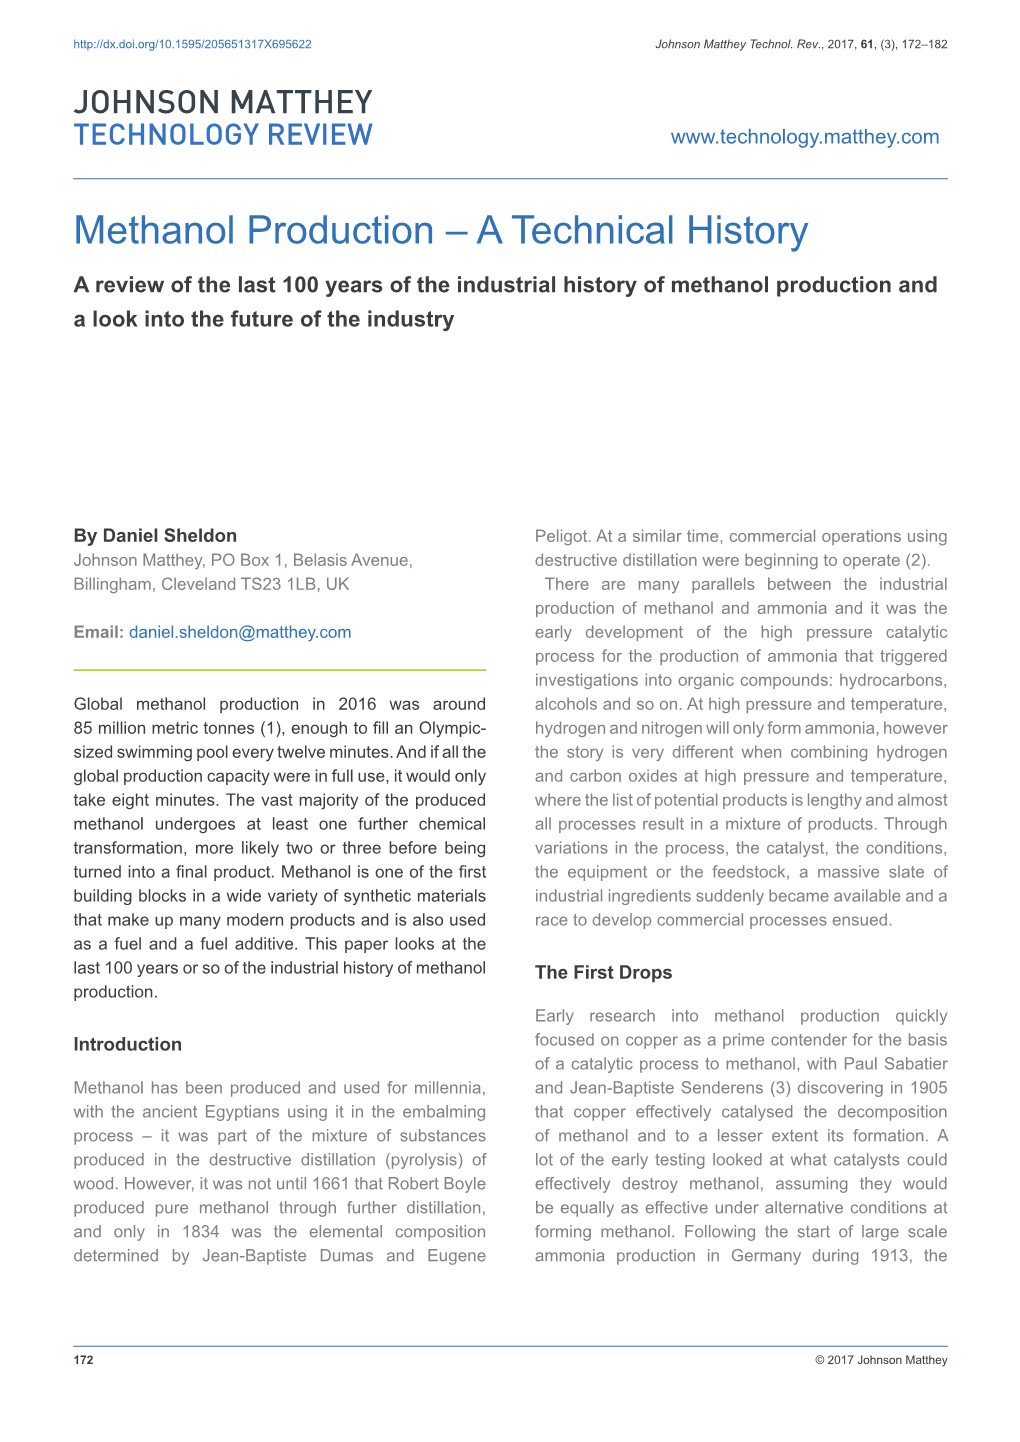 Methanol Production – a Technical History a Review of the Last 100 Years of the Industrial History of Methanol Production and a Look Into the Future of the Industry